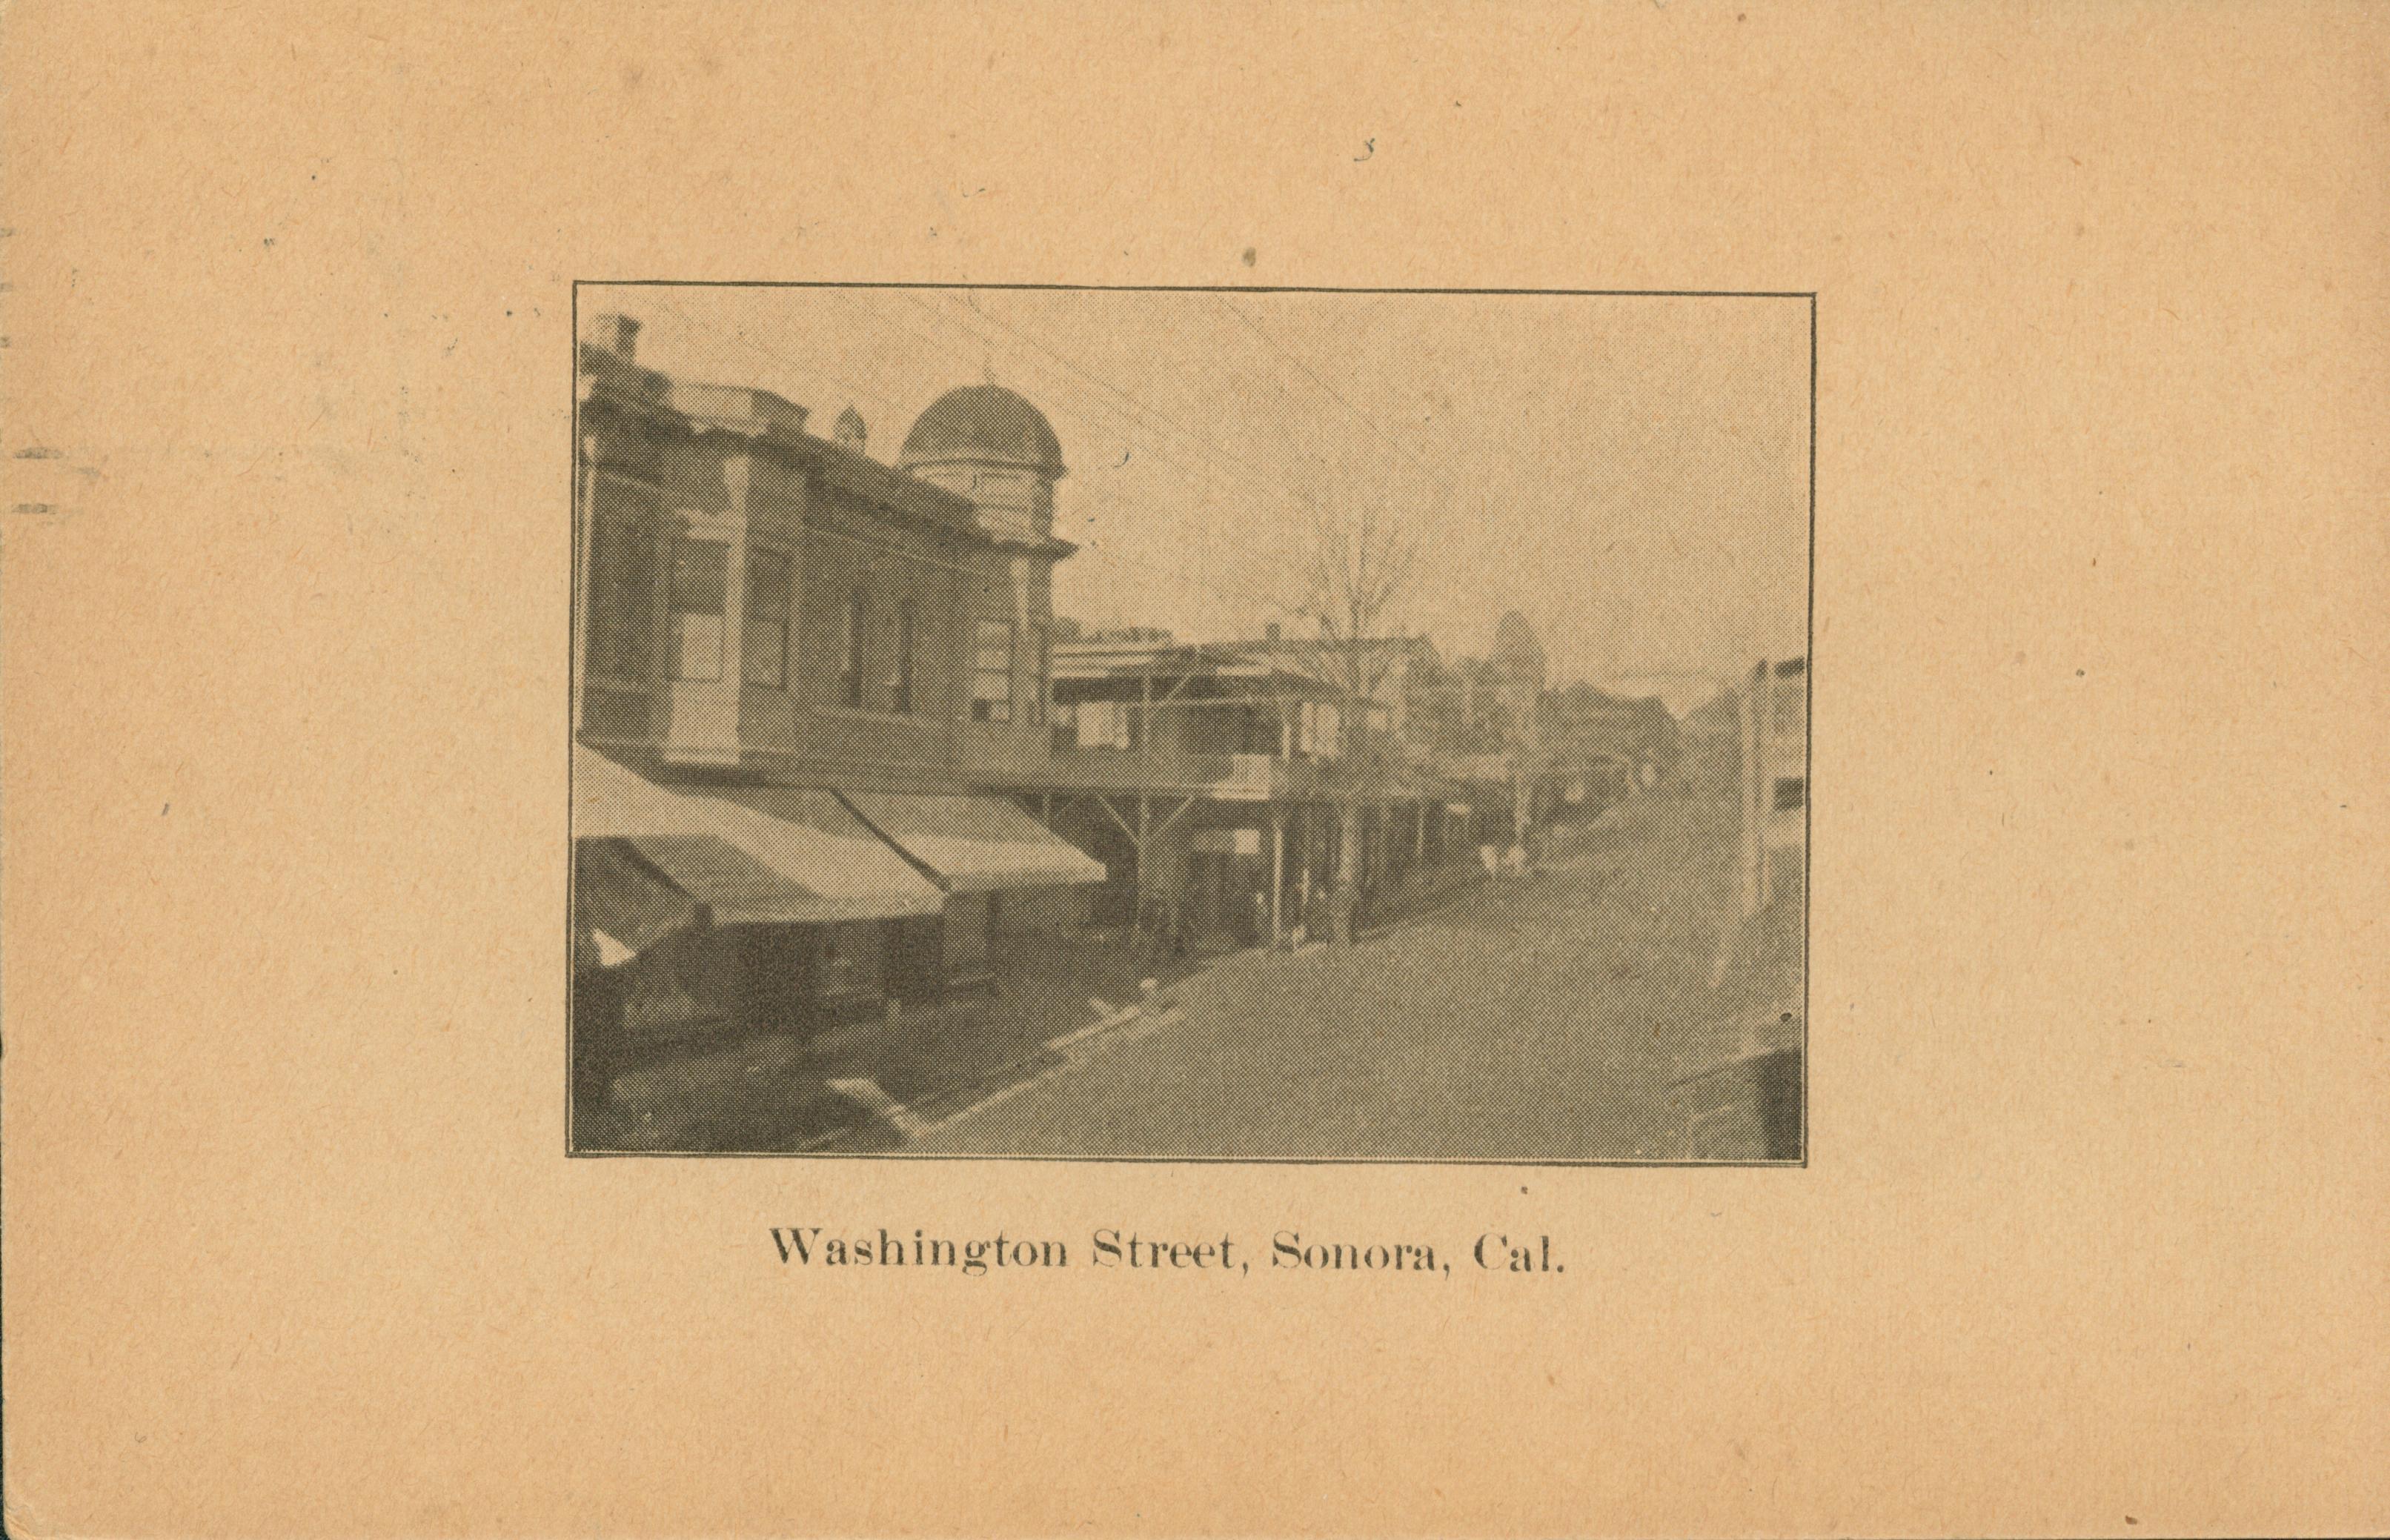 Shows Washington Street in Sonora lined with buildings